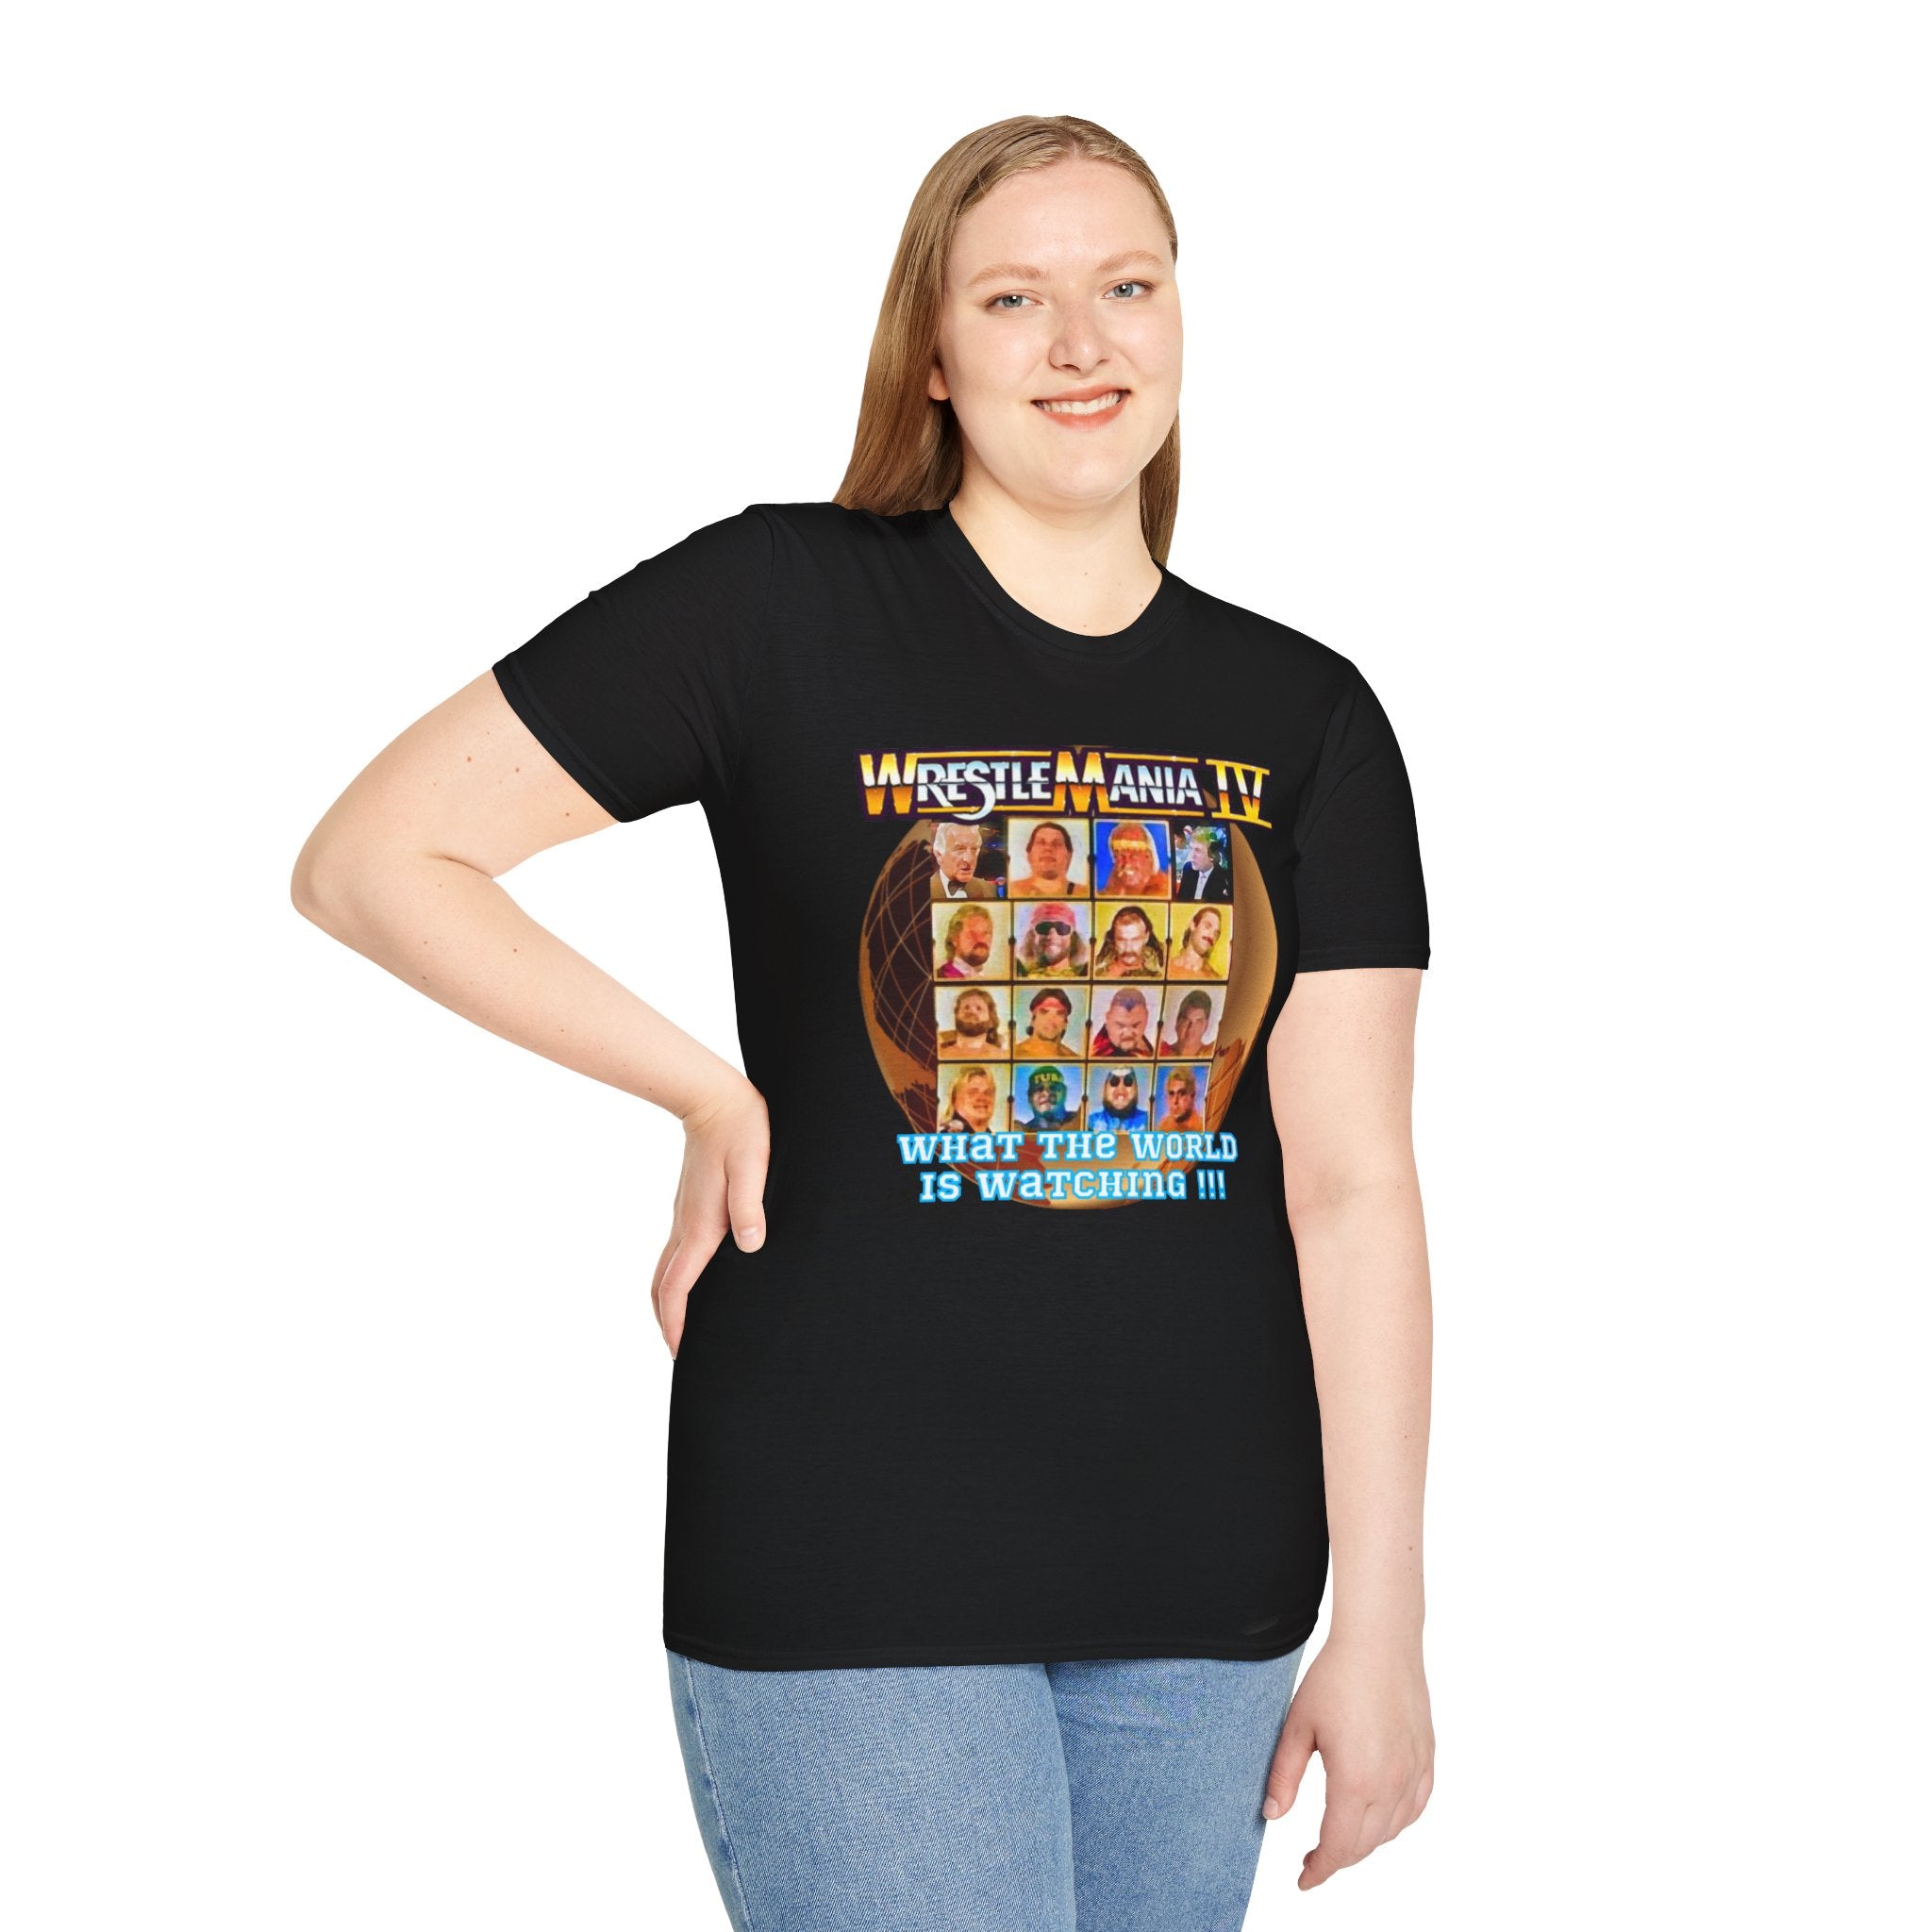 Wrestlemania 4 - what the world is watching t-shirt